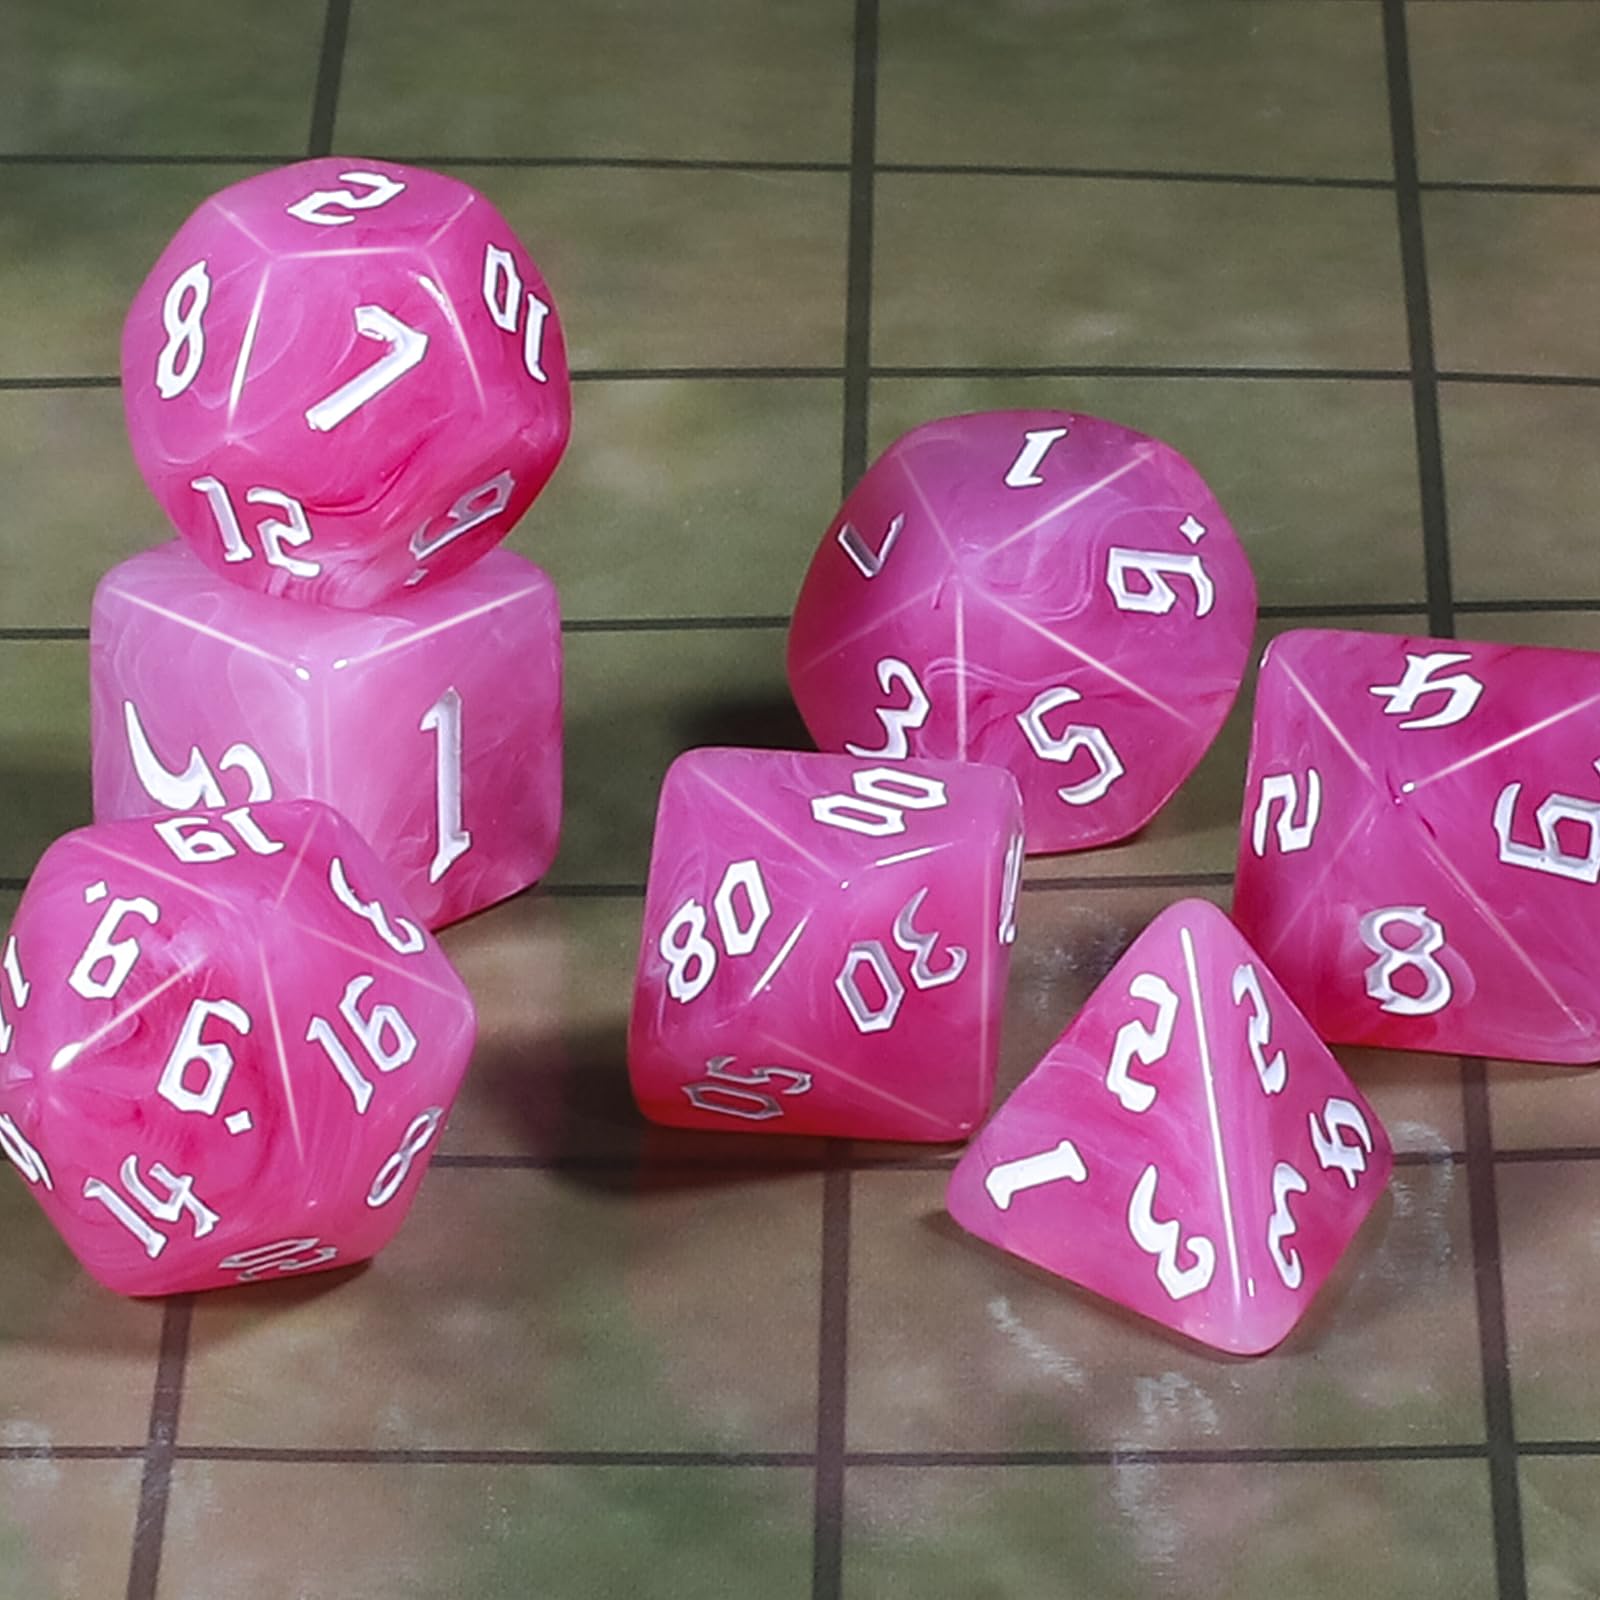 CiaraQ DND Polyhedral Dice Set for Dungeons and Dragons RPG MTG Role Playing Table Games-with 1 Dice Pouch (Pink Gradient)